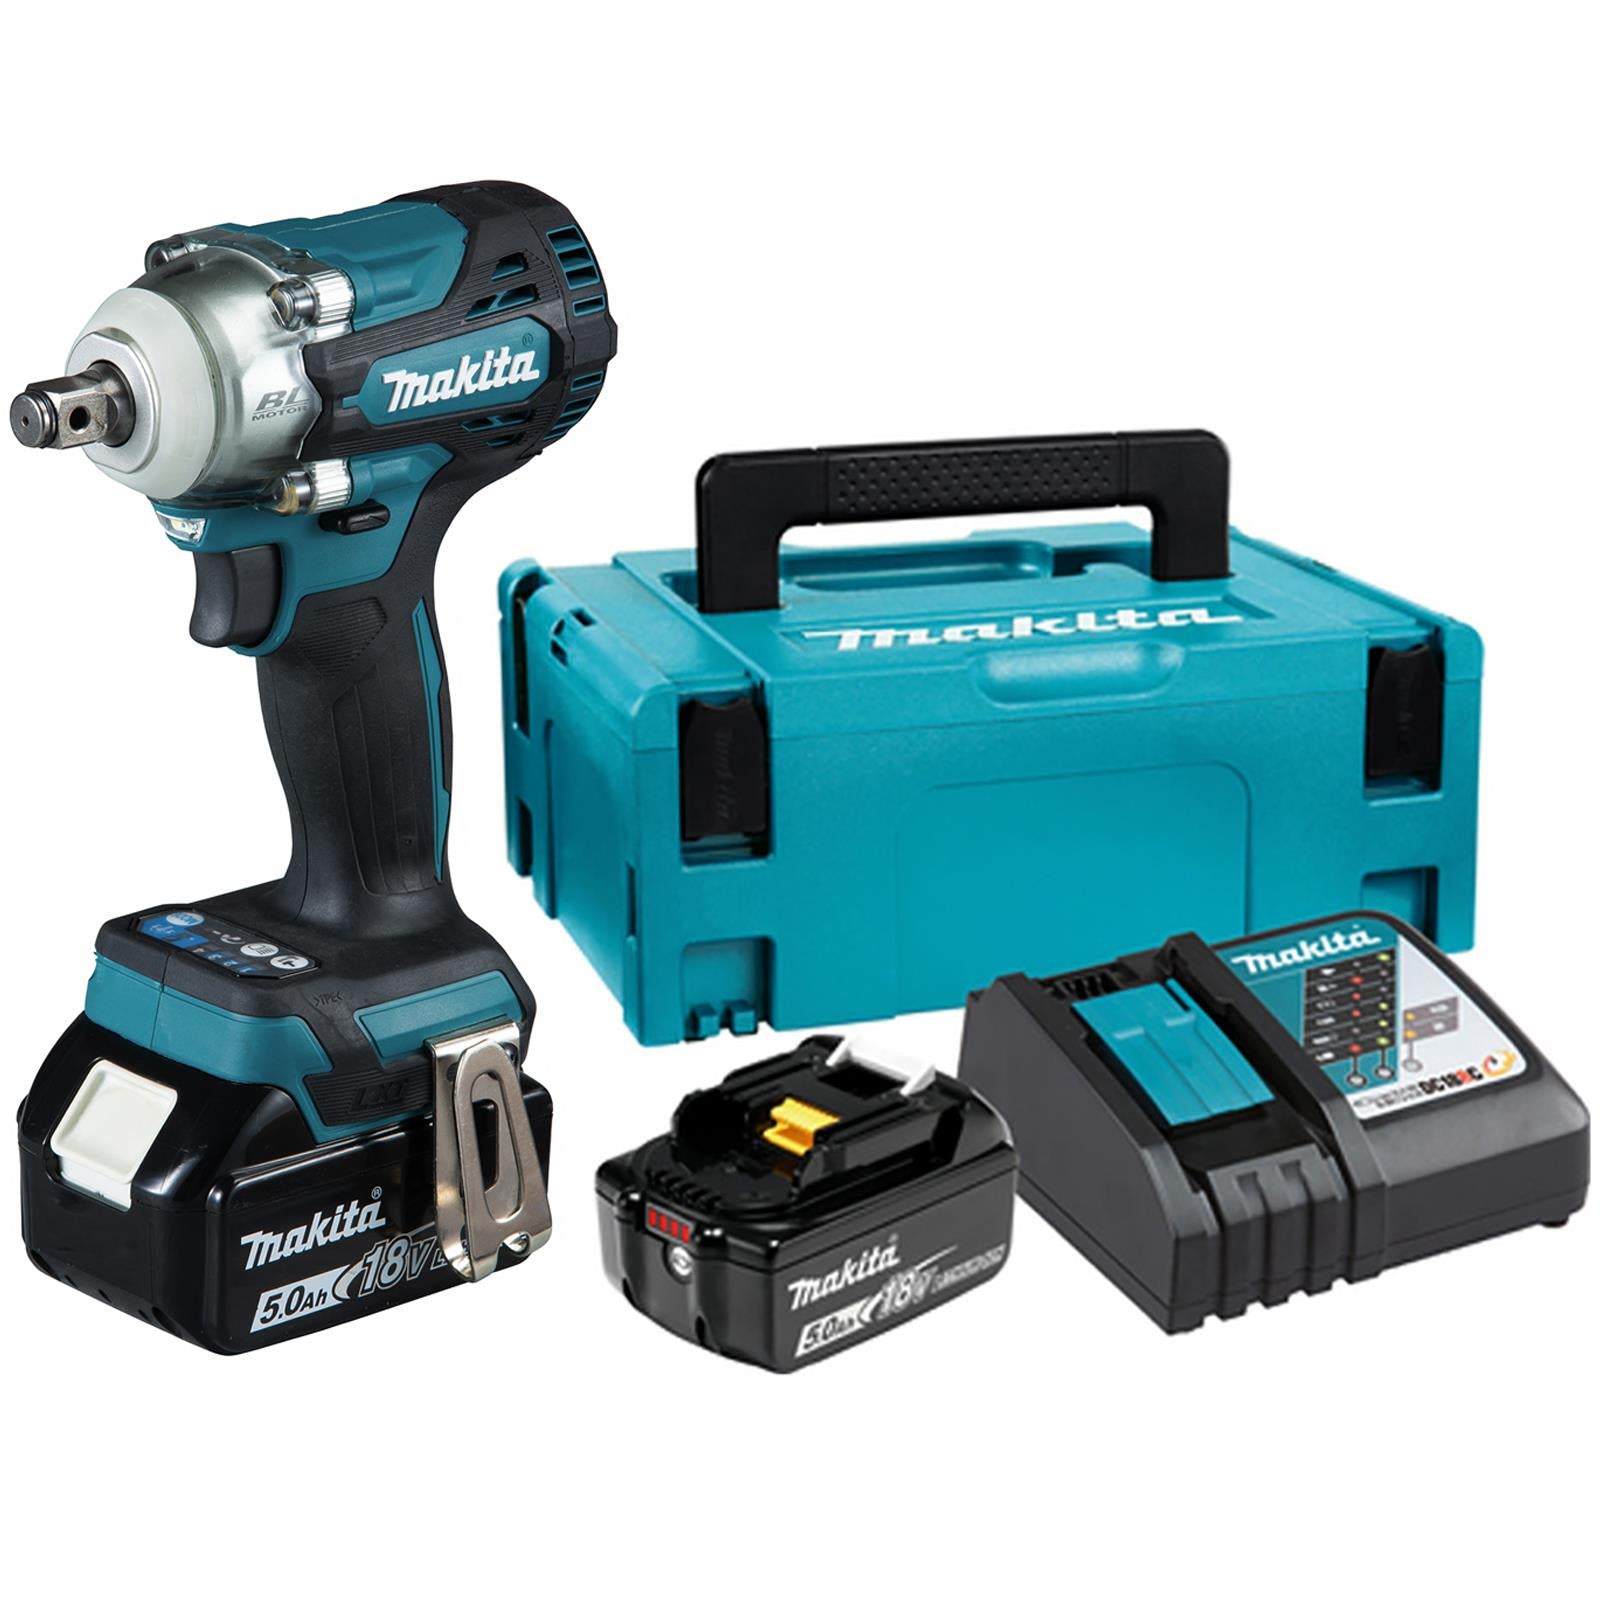 Makita Impact Wrench 1/2" Drive 18V LXT Brushless Li-ion 2 x 5Ah Charger Type 2 Case DTW300RTJ